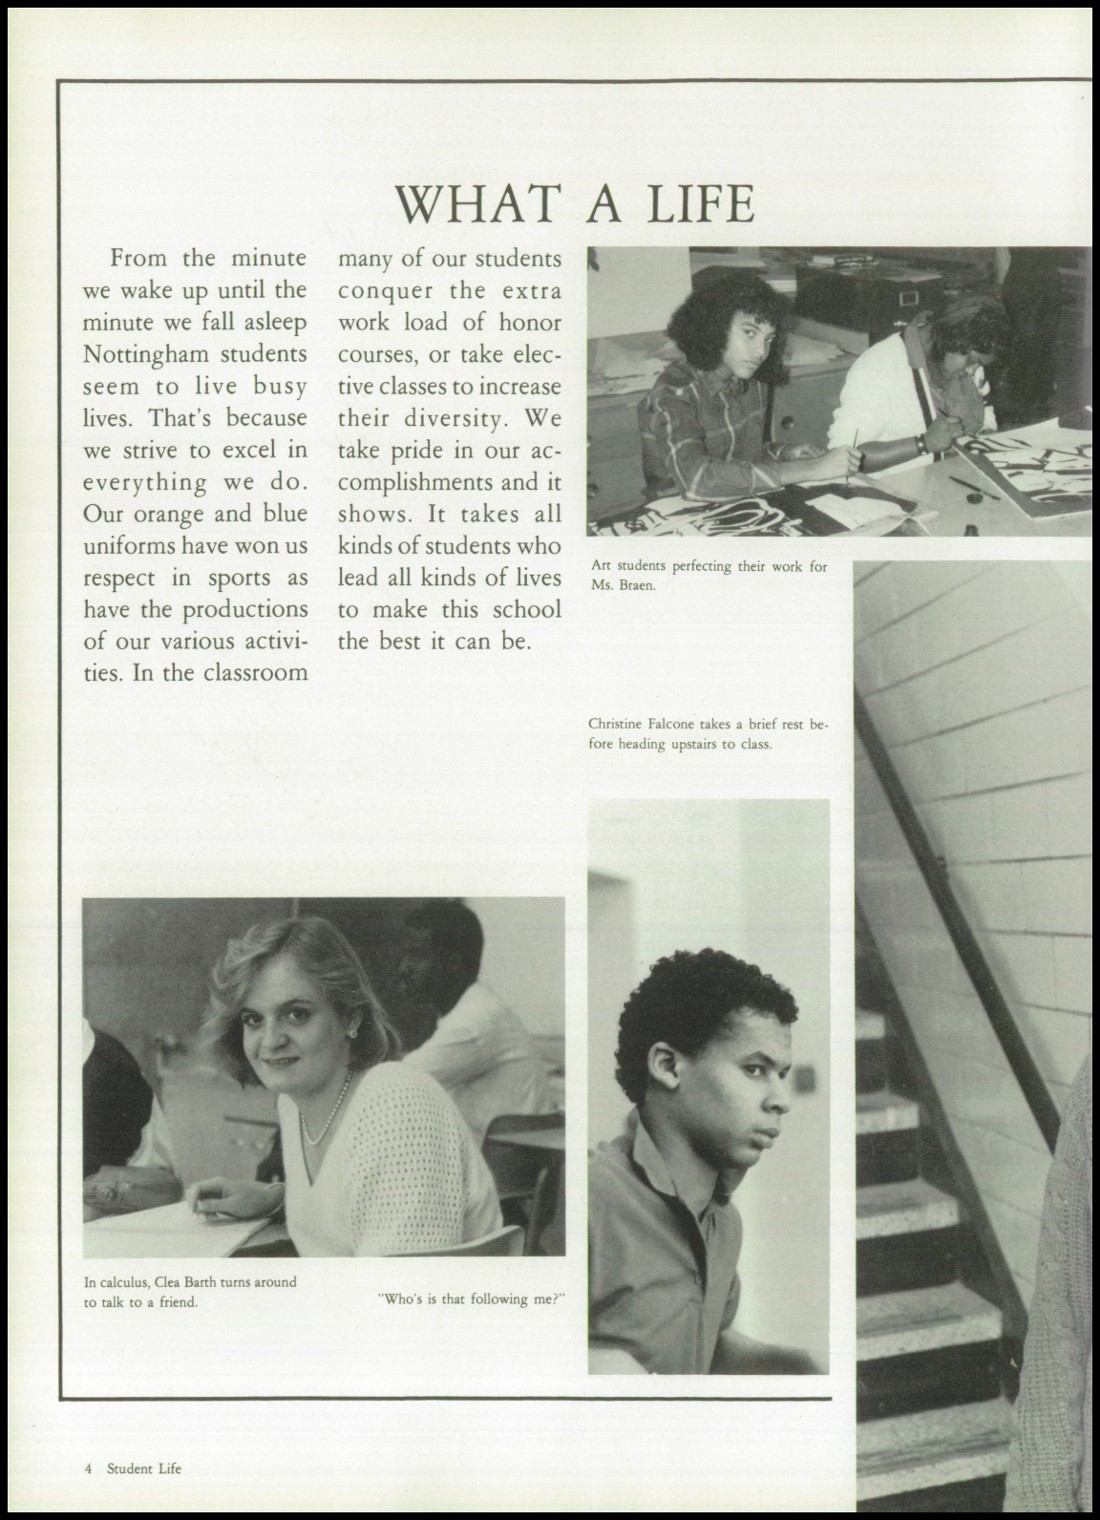 1986 yearbook from Nottingham High School from Syracuse, New York